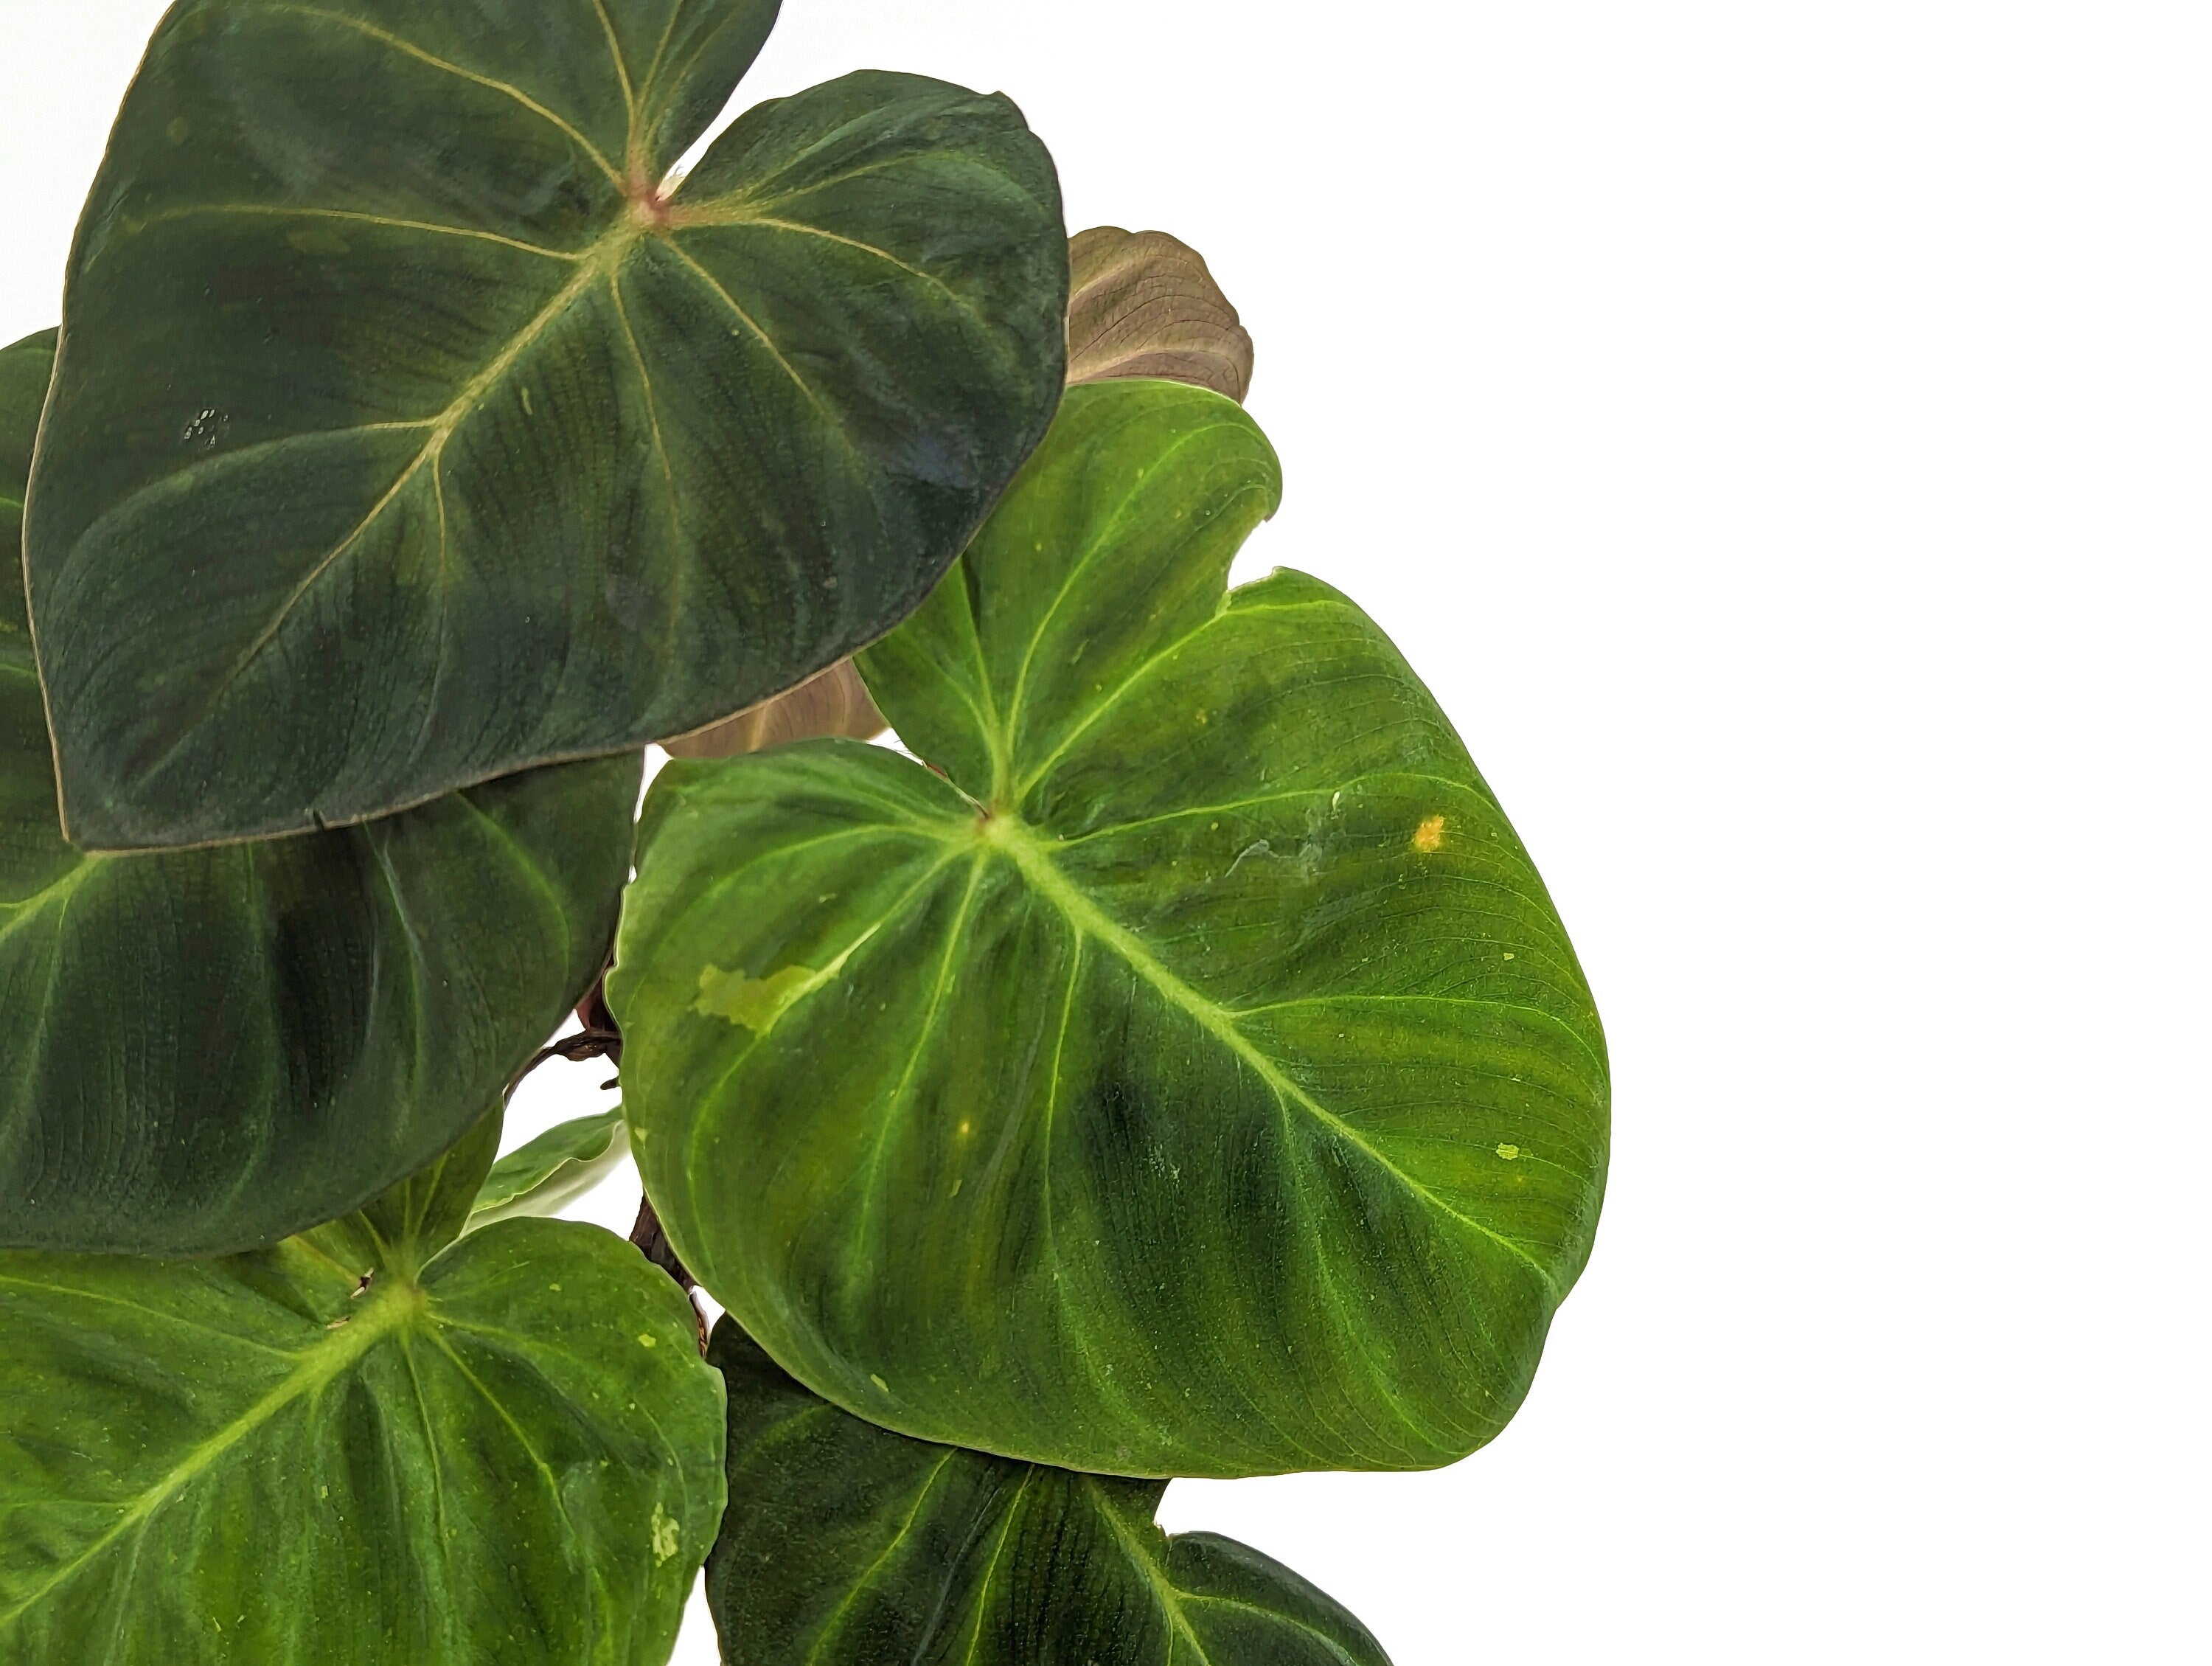 Variegated Philodendron Monkey Tail - Fibrosum x Verrucosum Hybrid Each One is One of A Kind Seed Grown - 4 inch pot